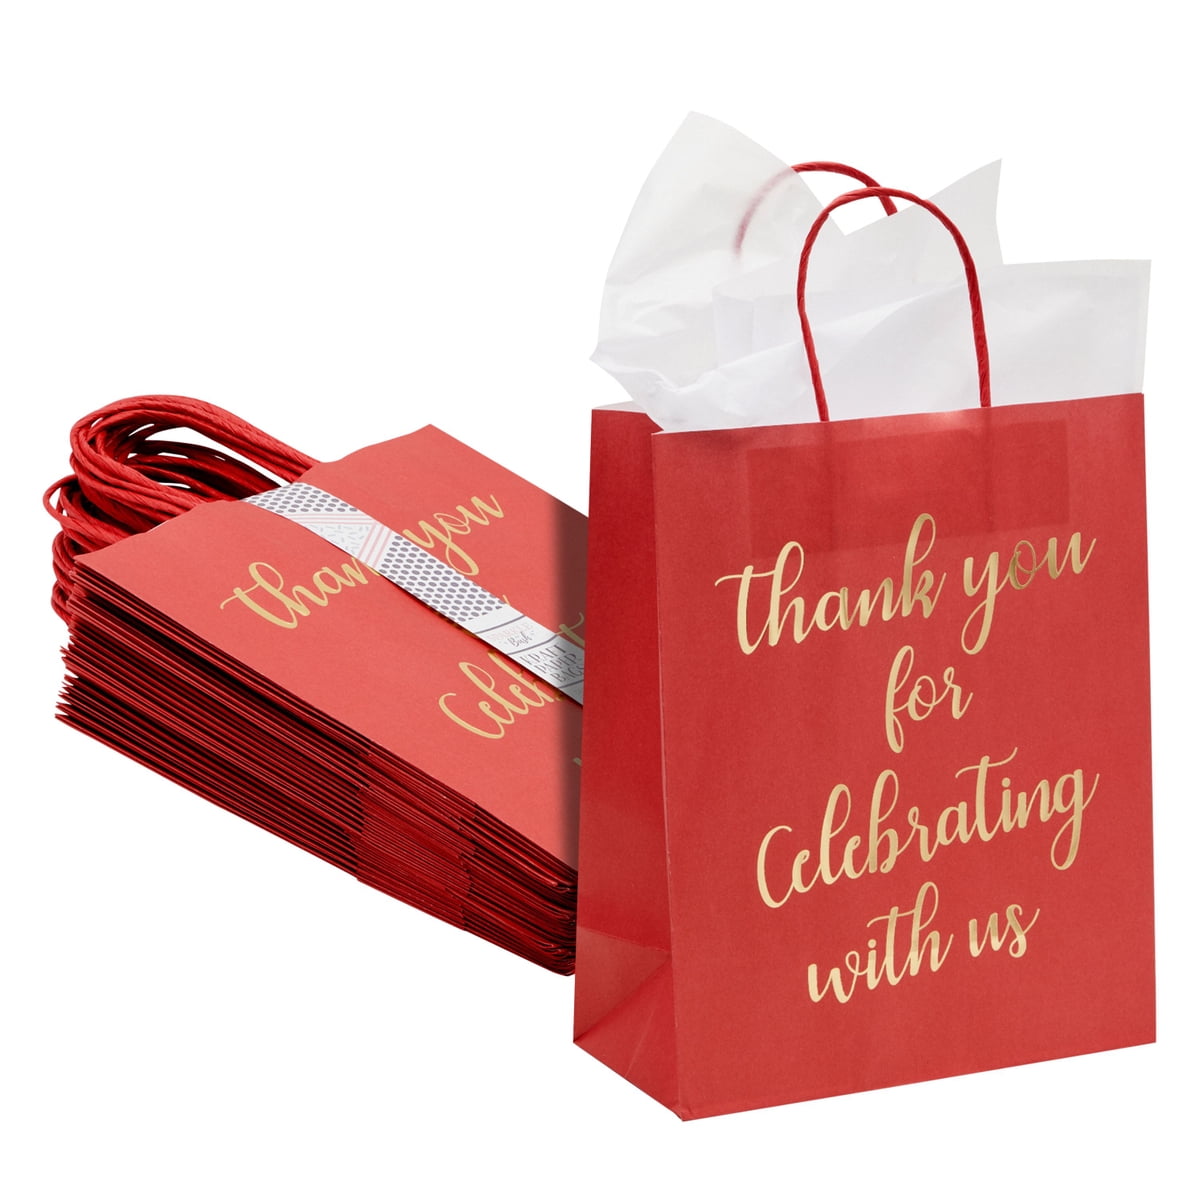  GSSUSA Gift Bags Medium 8x4.75x10.5 Red Paper Bags